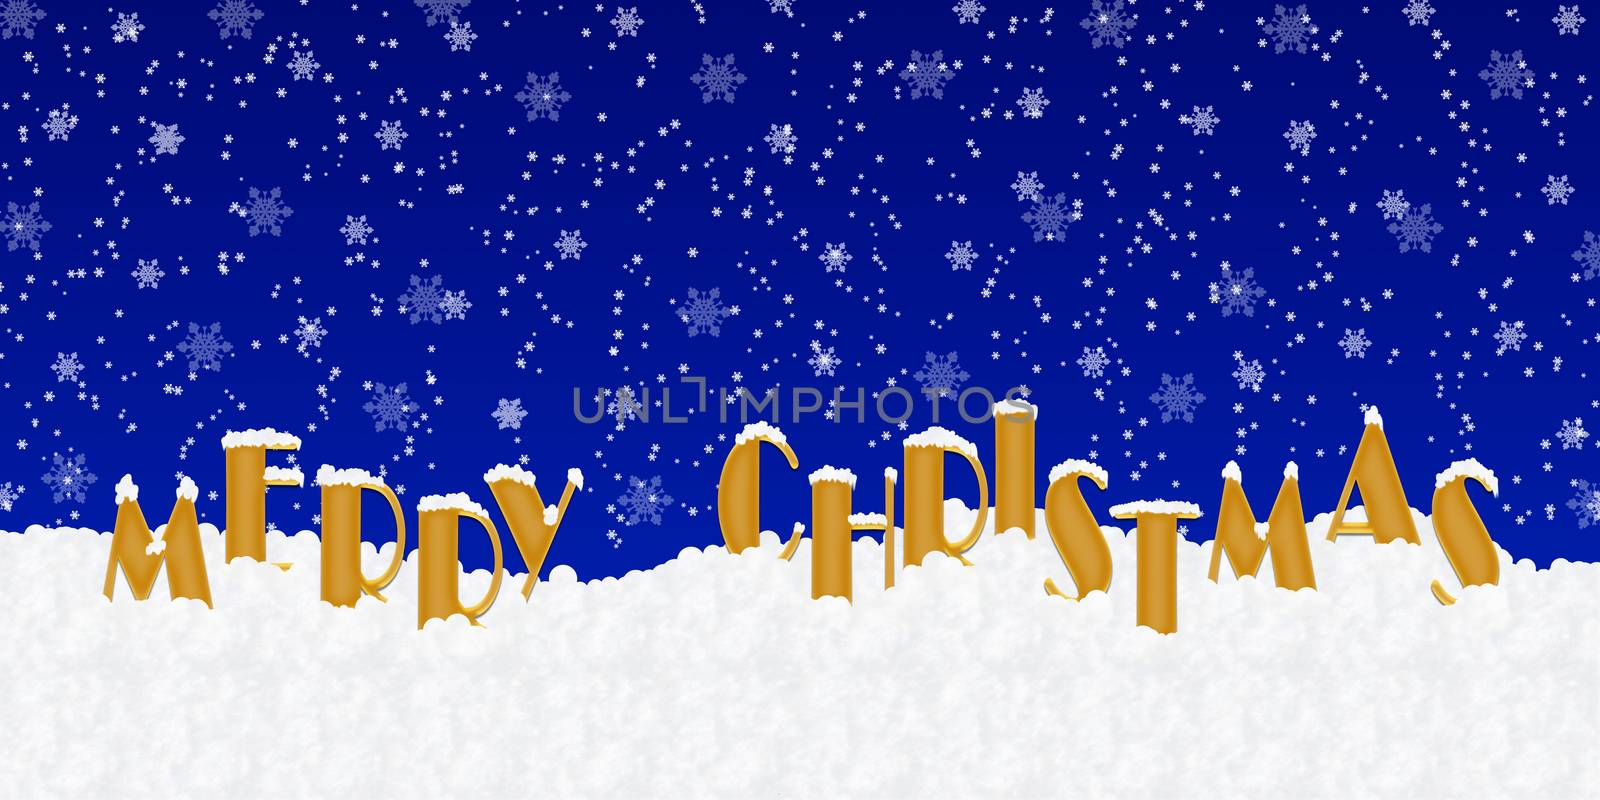 Blank for Christmas greetings with letters on snow and blue Chri by Grommik